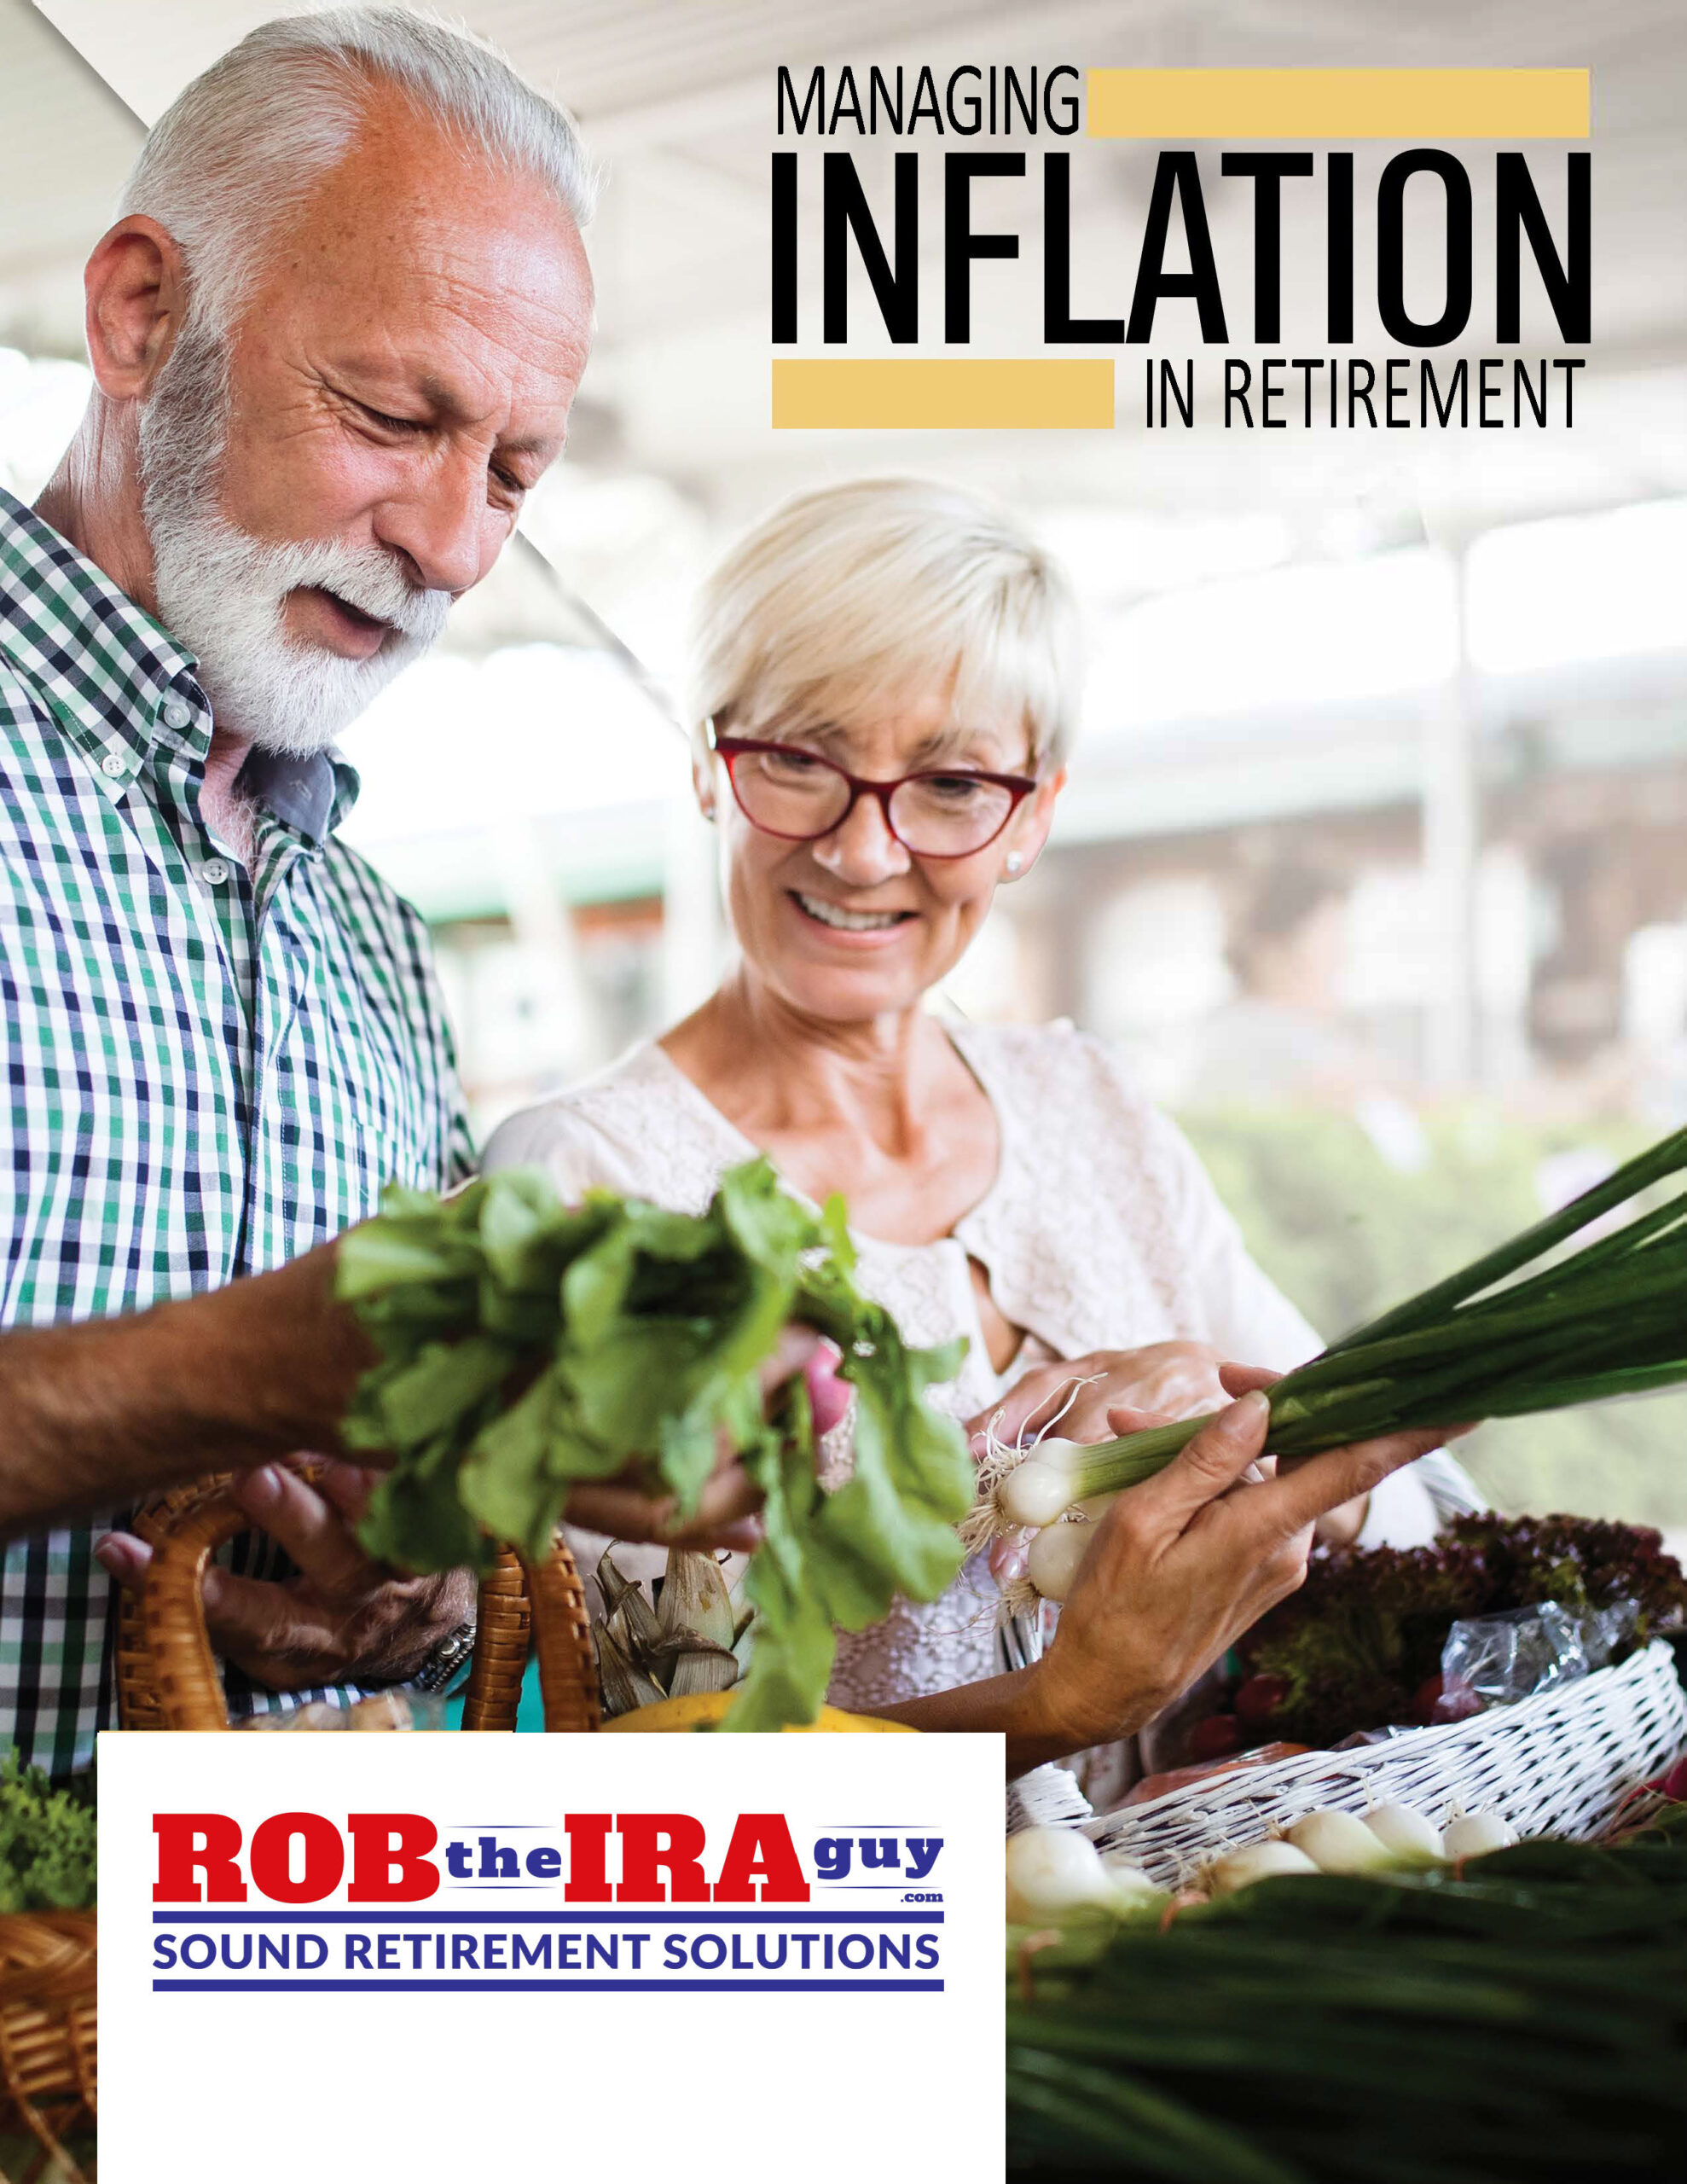 Managing Inflation in Retirement